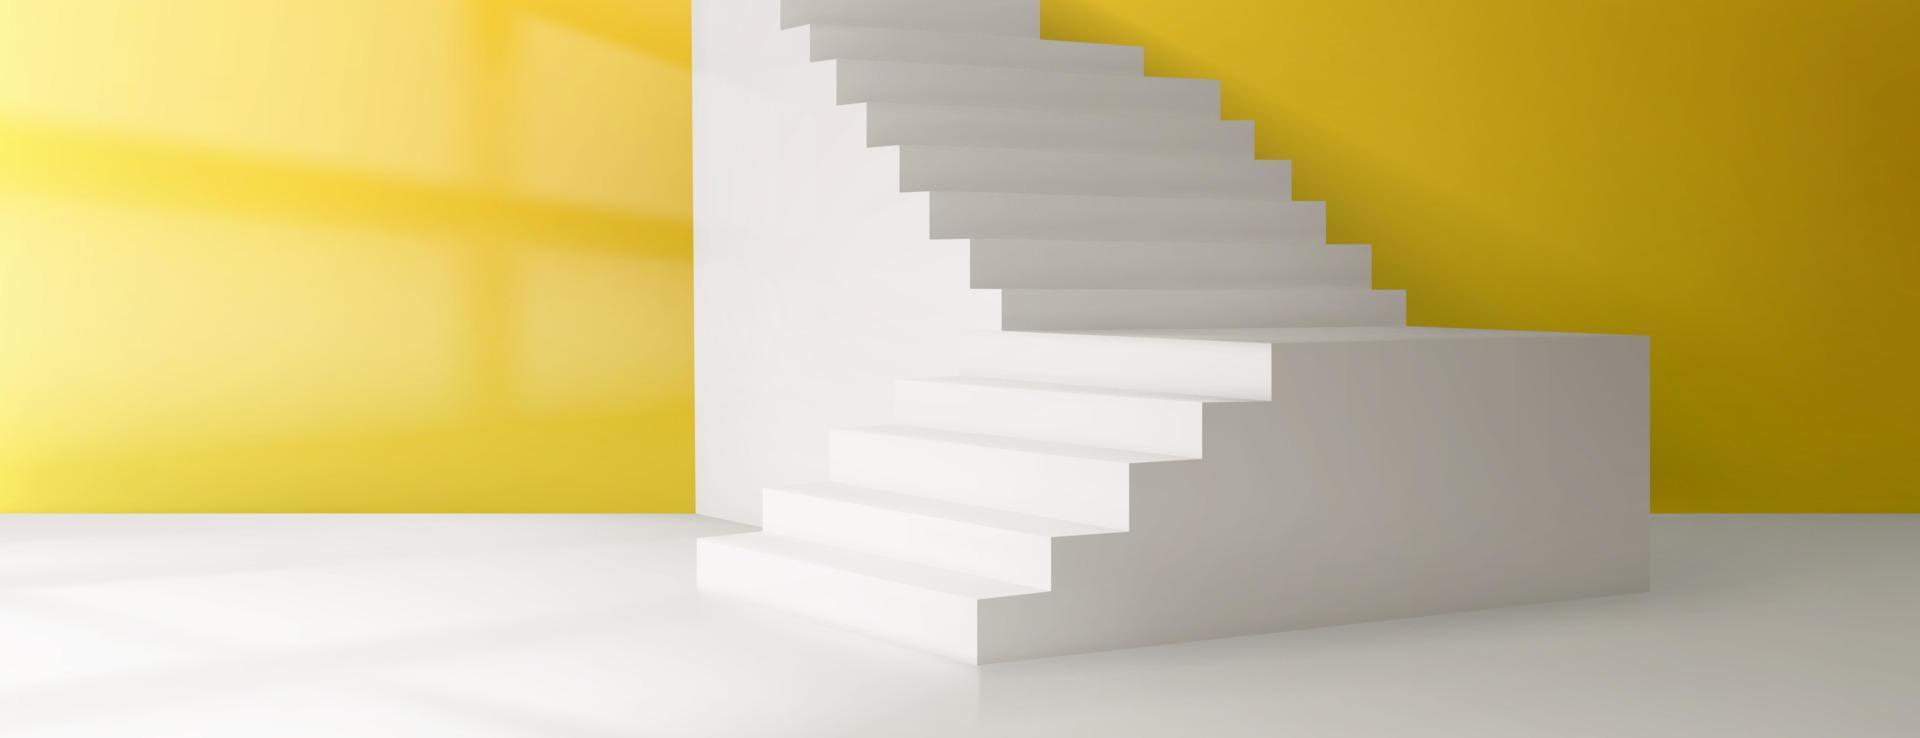 3d vector room with stairs, yellow wall background